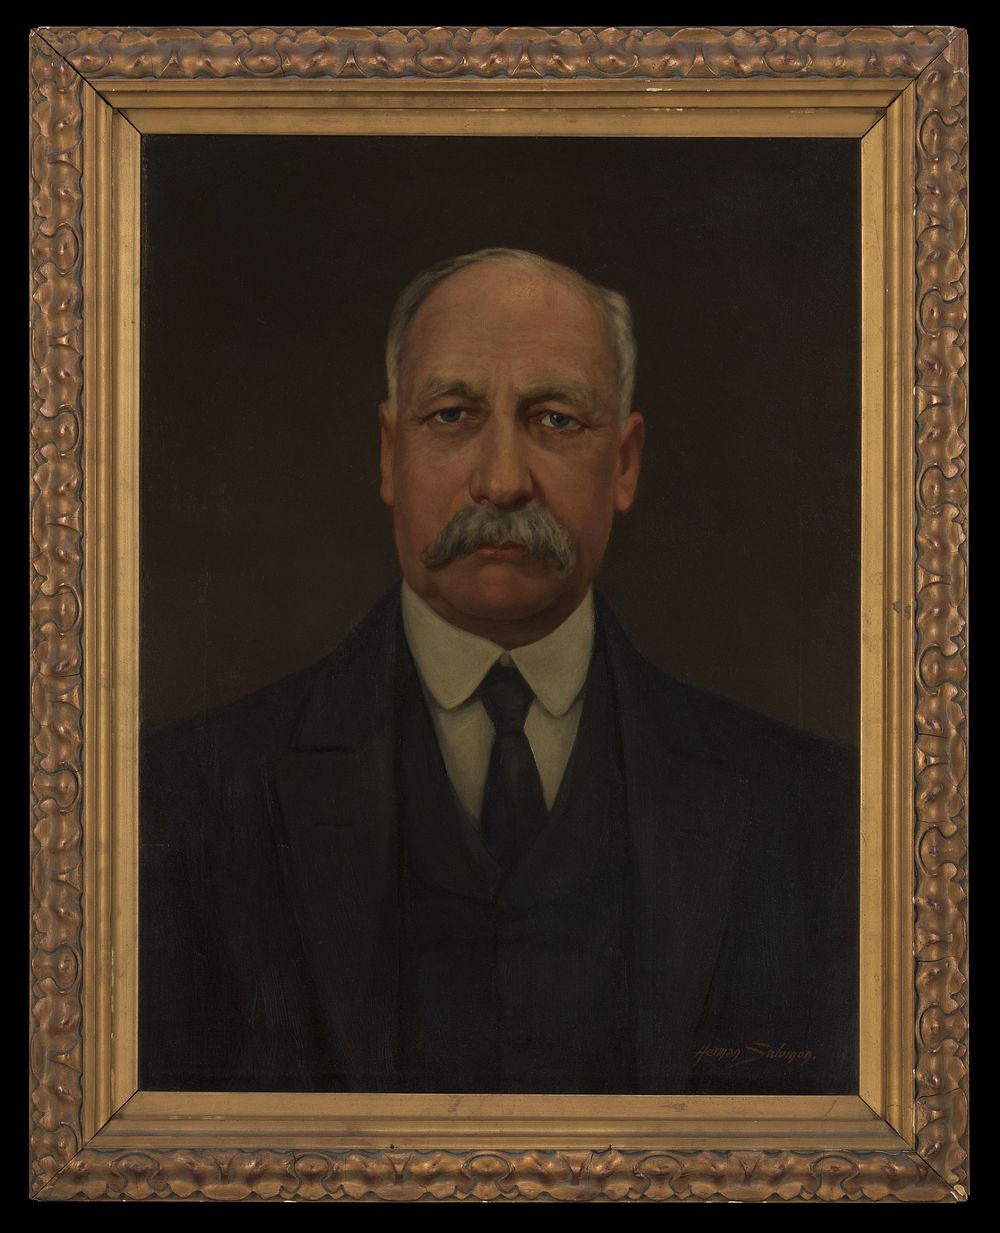 Daniel Berthelot (1865-1927). Oil painting by Harry Herman Salomon after a photograph.